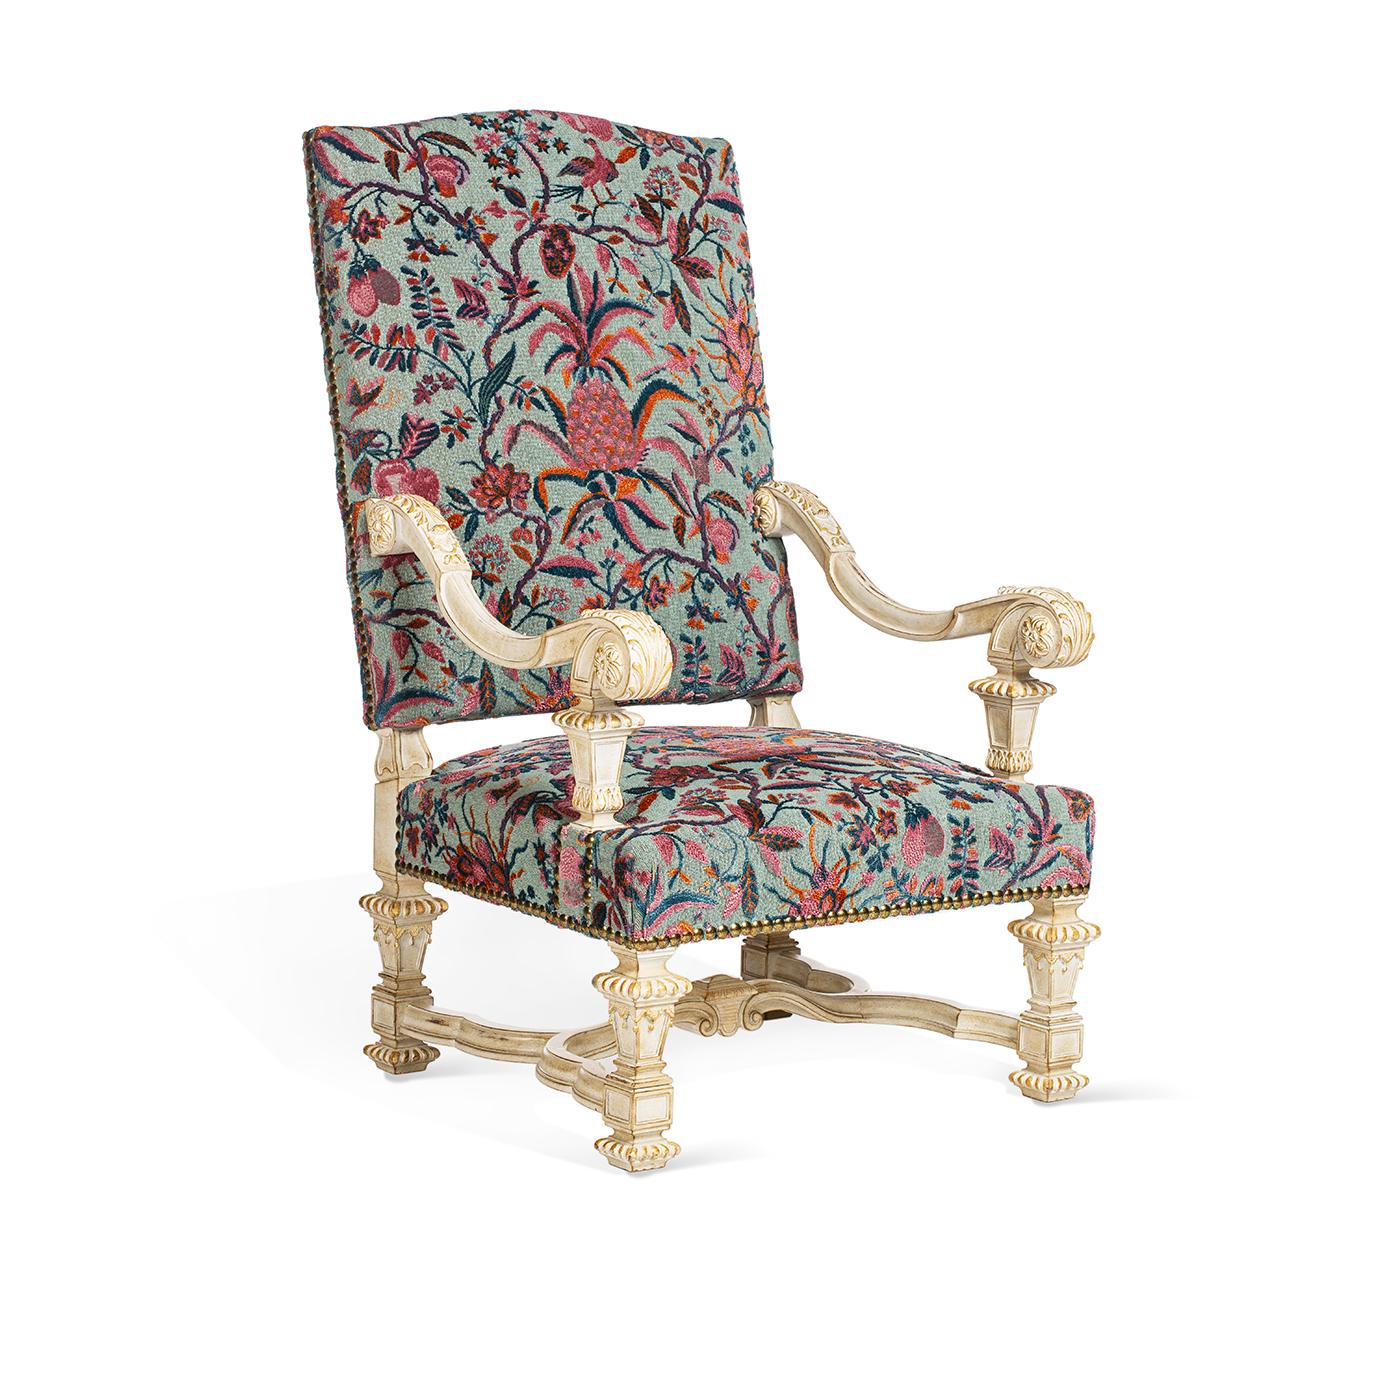 This fancy armchair is fully padded for a comfortable seat, made of beechwood and upholstered in premium fabric with a floral motif. It has golden carvings all around it and they are all hand-made by expert craftsmen. The seat is 38cm tall by itself